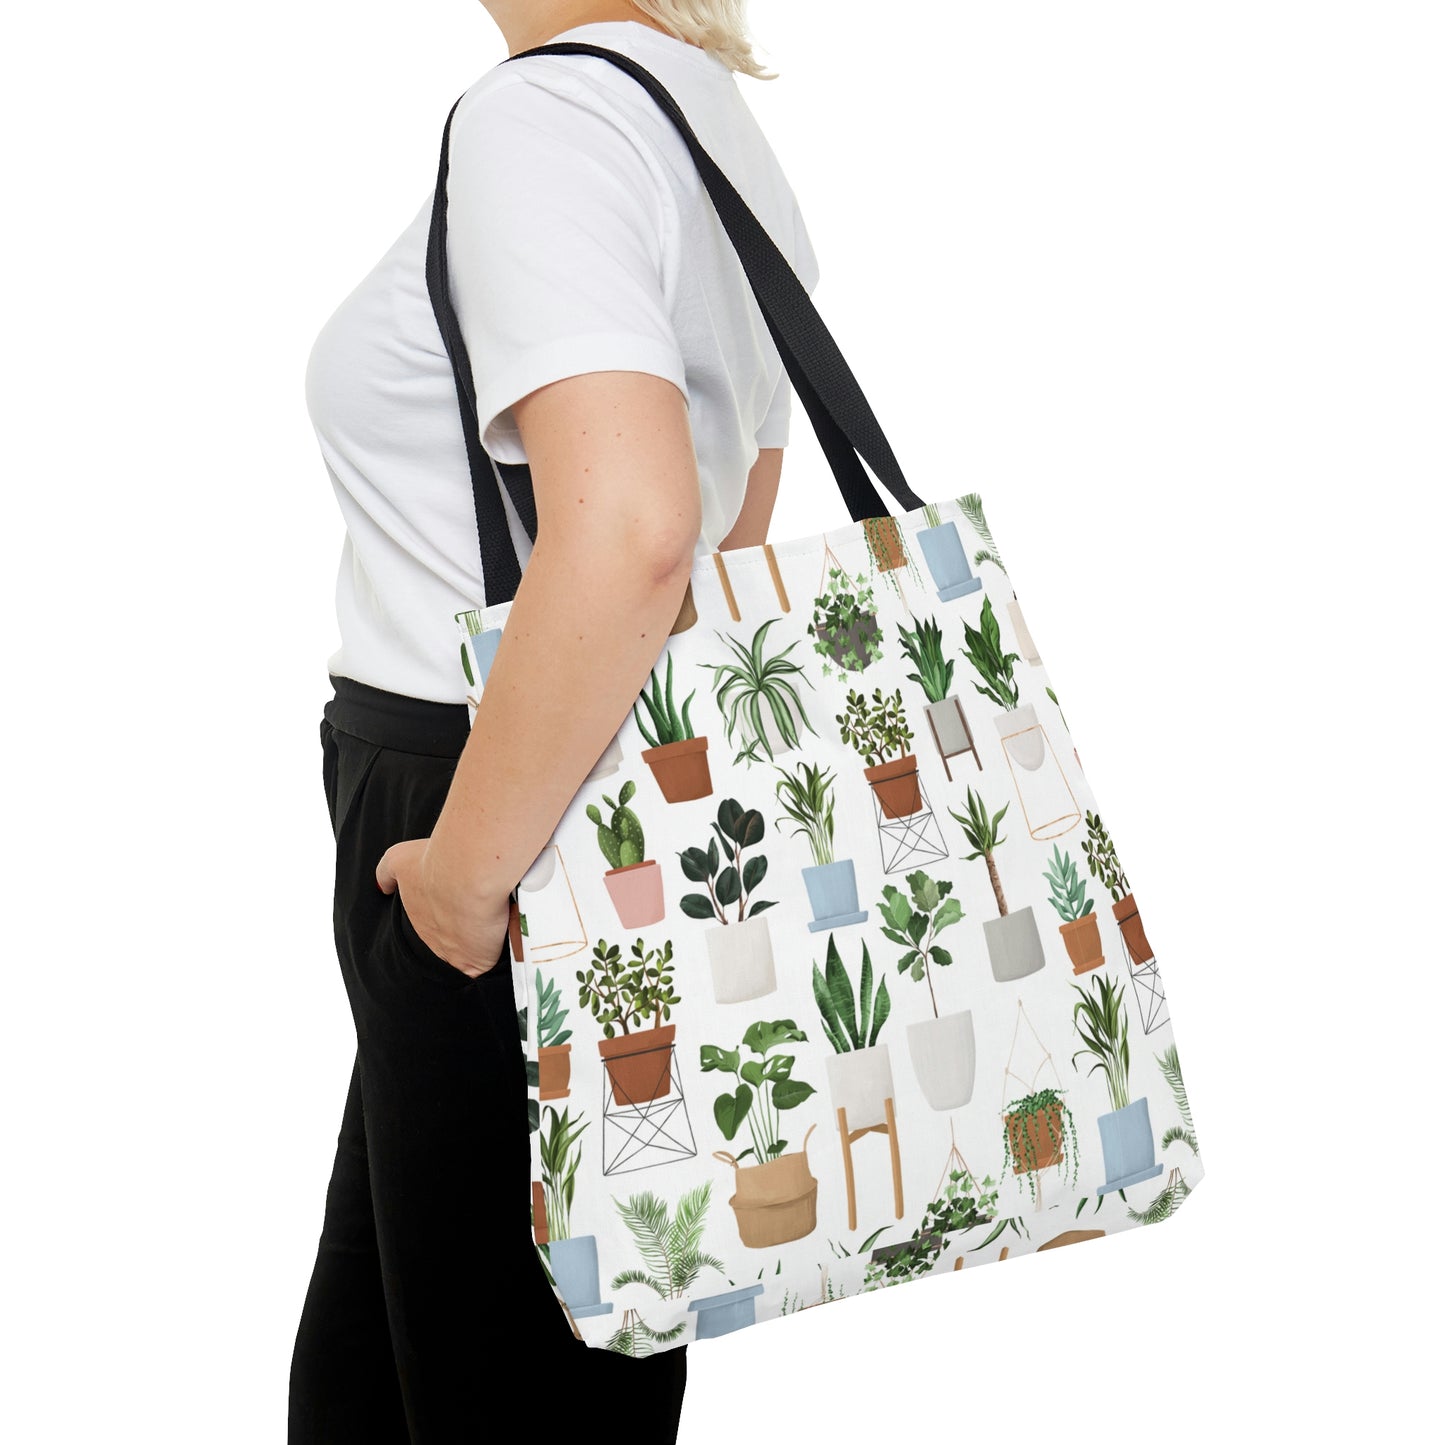 House plants Tote Bag for plant lover, plant mama or plant lady. Cute plant christmas gift for mother in law or girlfriend